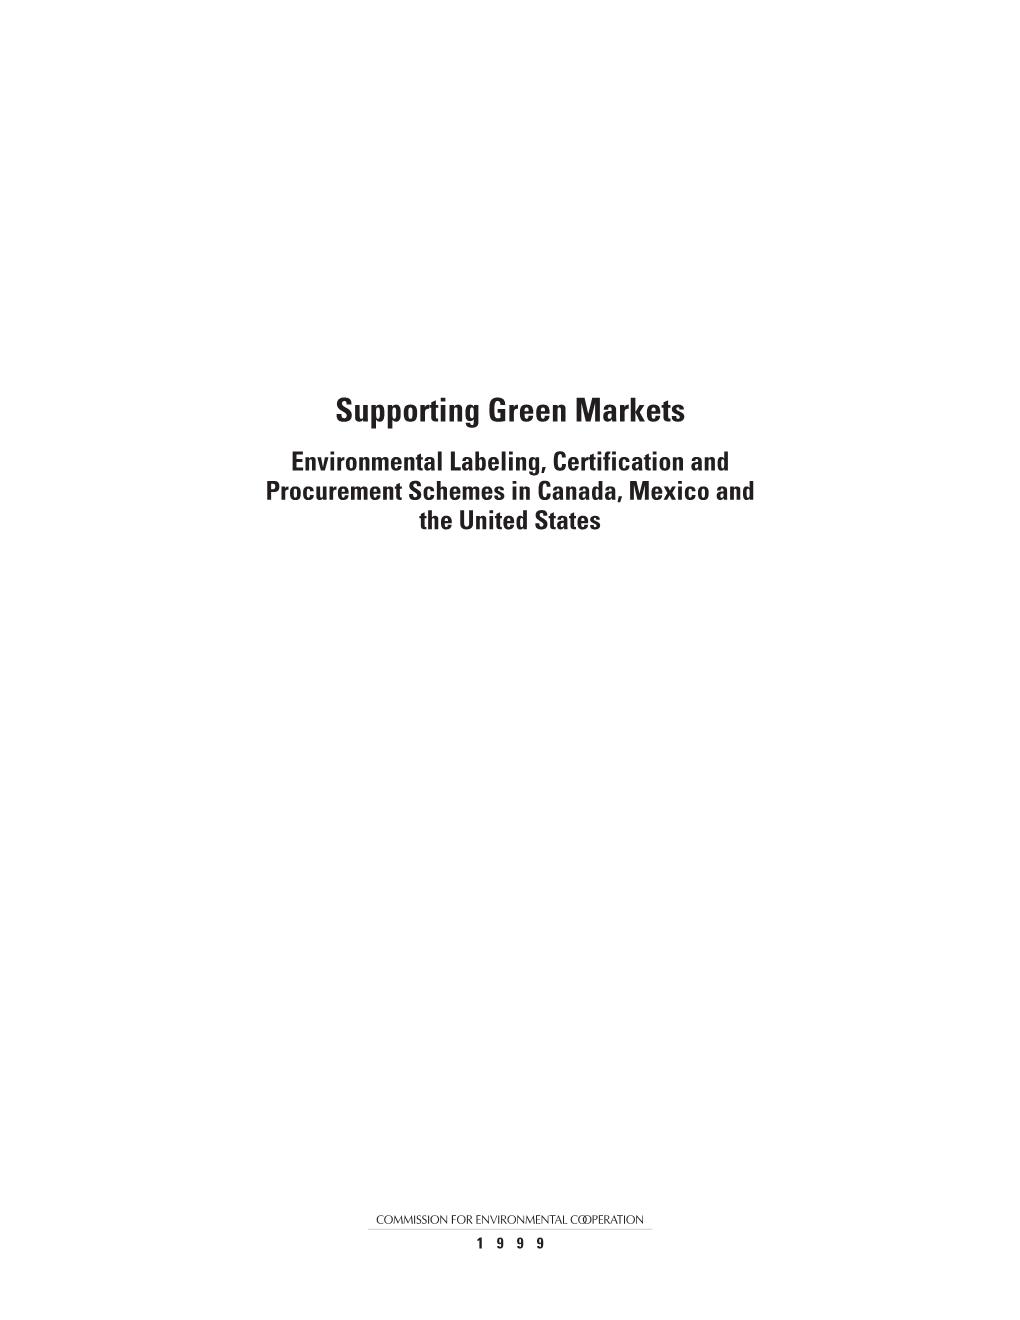 Supporting Green Markets Environmental Labeling, Certification and Procurement Schemes in Canada, Mexico and the United States